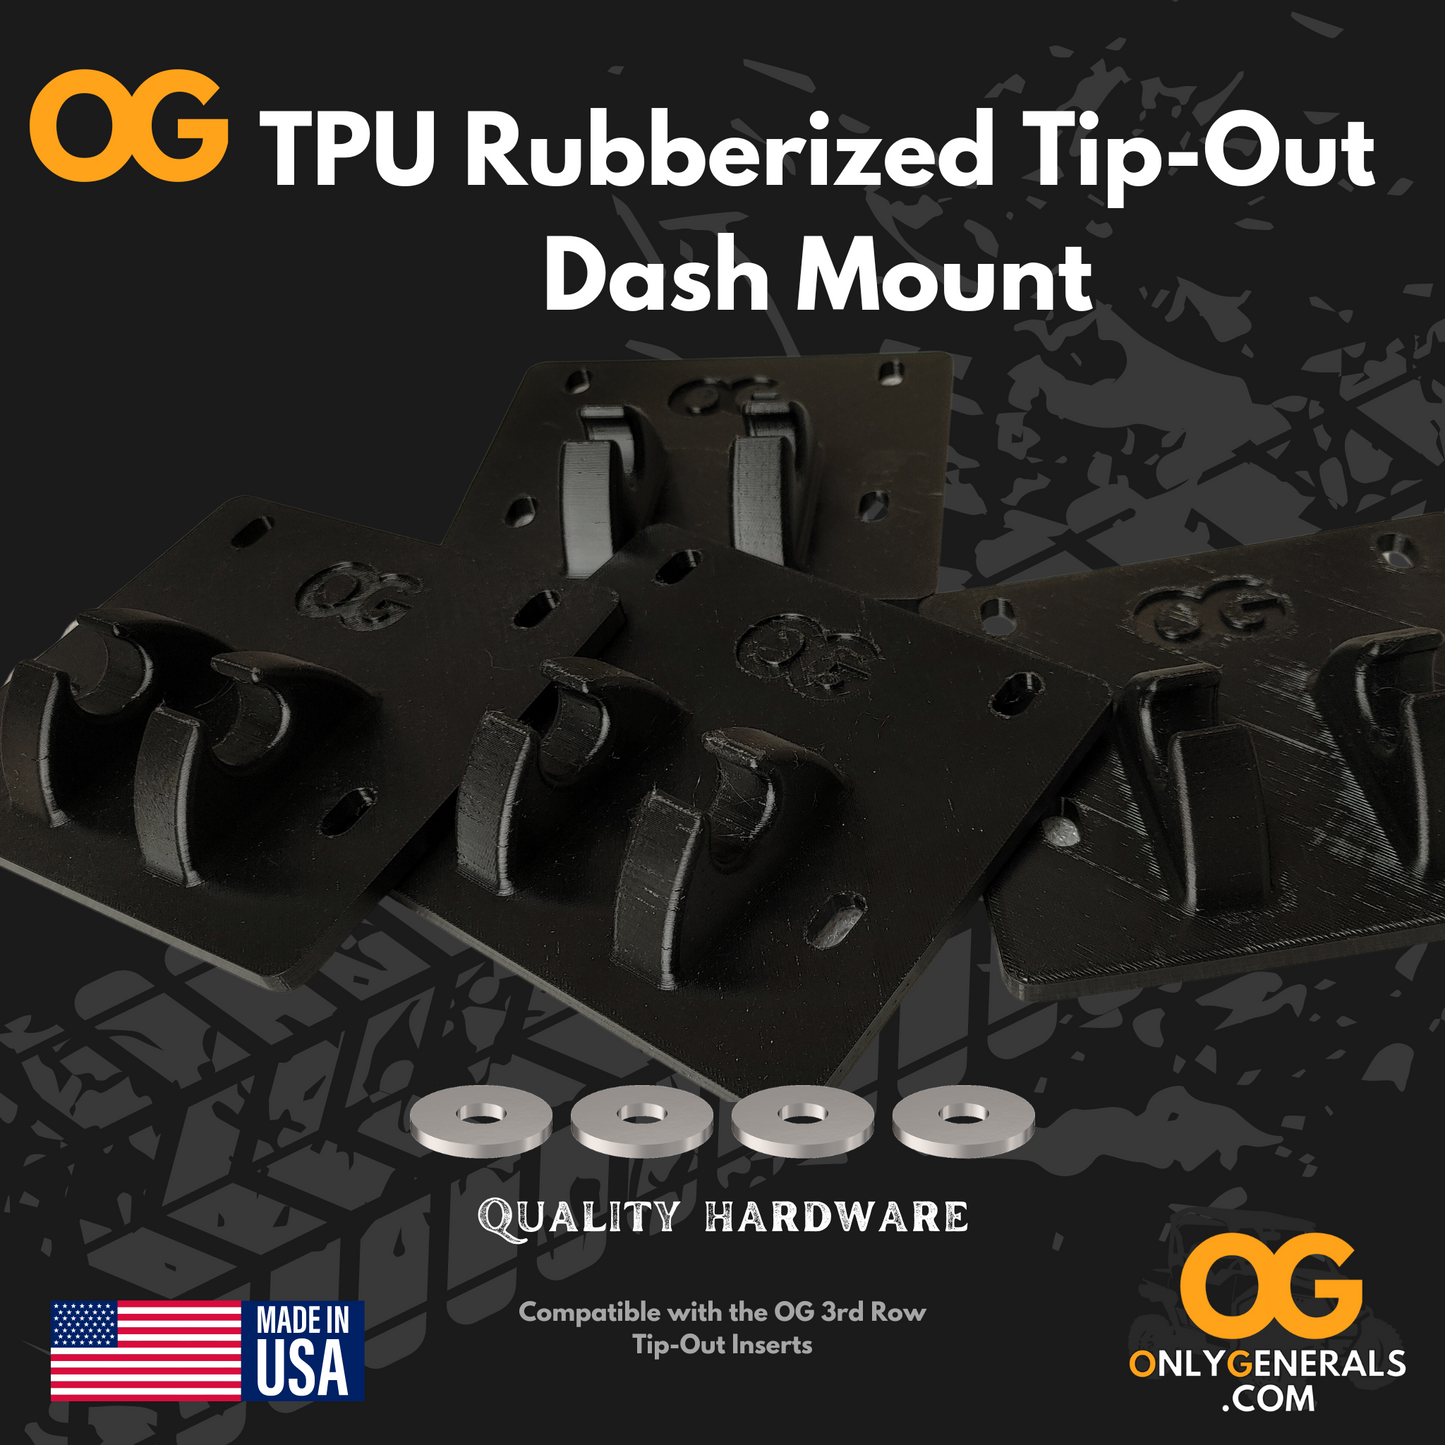 The main banner image showcasing the OnlyGenerals TPU rubberized dash plates for the Polaris General, along with four stainless steel washers and MADE in USA.